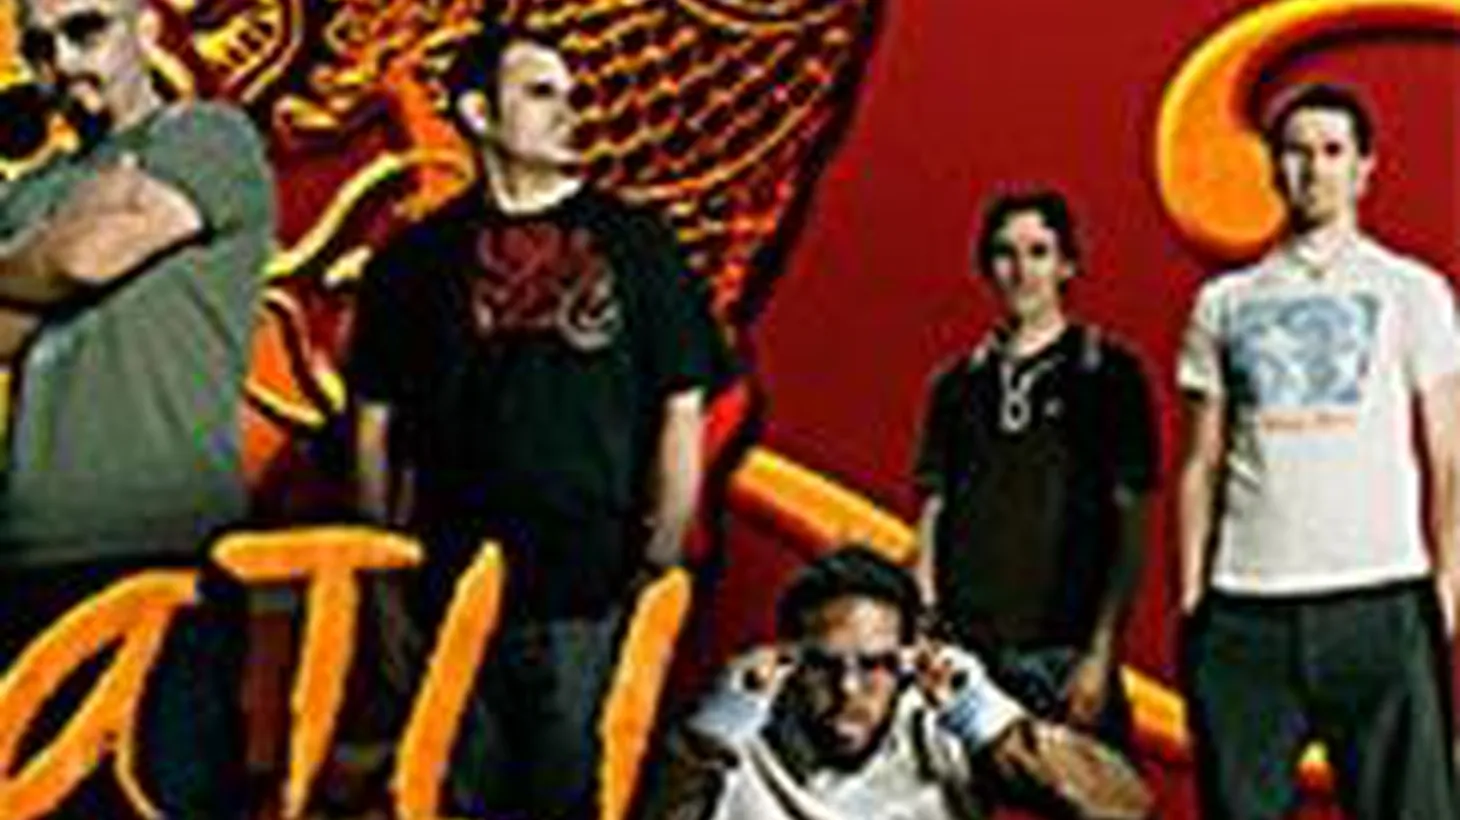 L.A. finest ensemble, Ozomatli, return with a new batch of songs on Morning Becomes Eclectic at 11:15am.